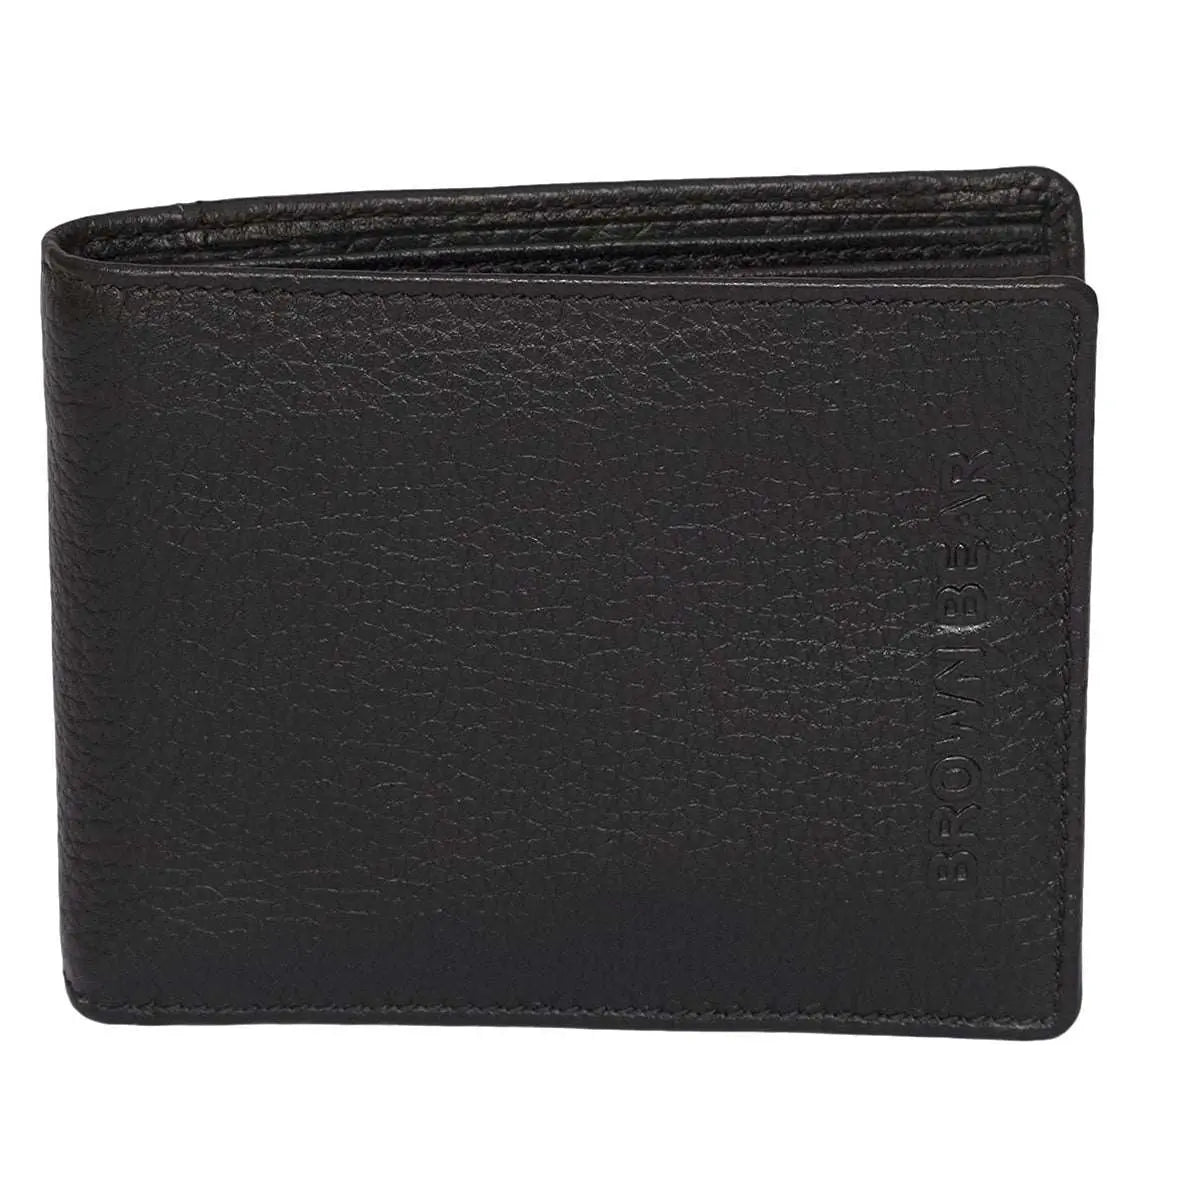 Buy Wallet for Men Wallets for Men Mens wallet Men wallets leather wallet  Purse cardholder genuine leather Online In India At Discounted Prices